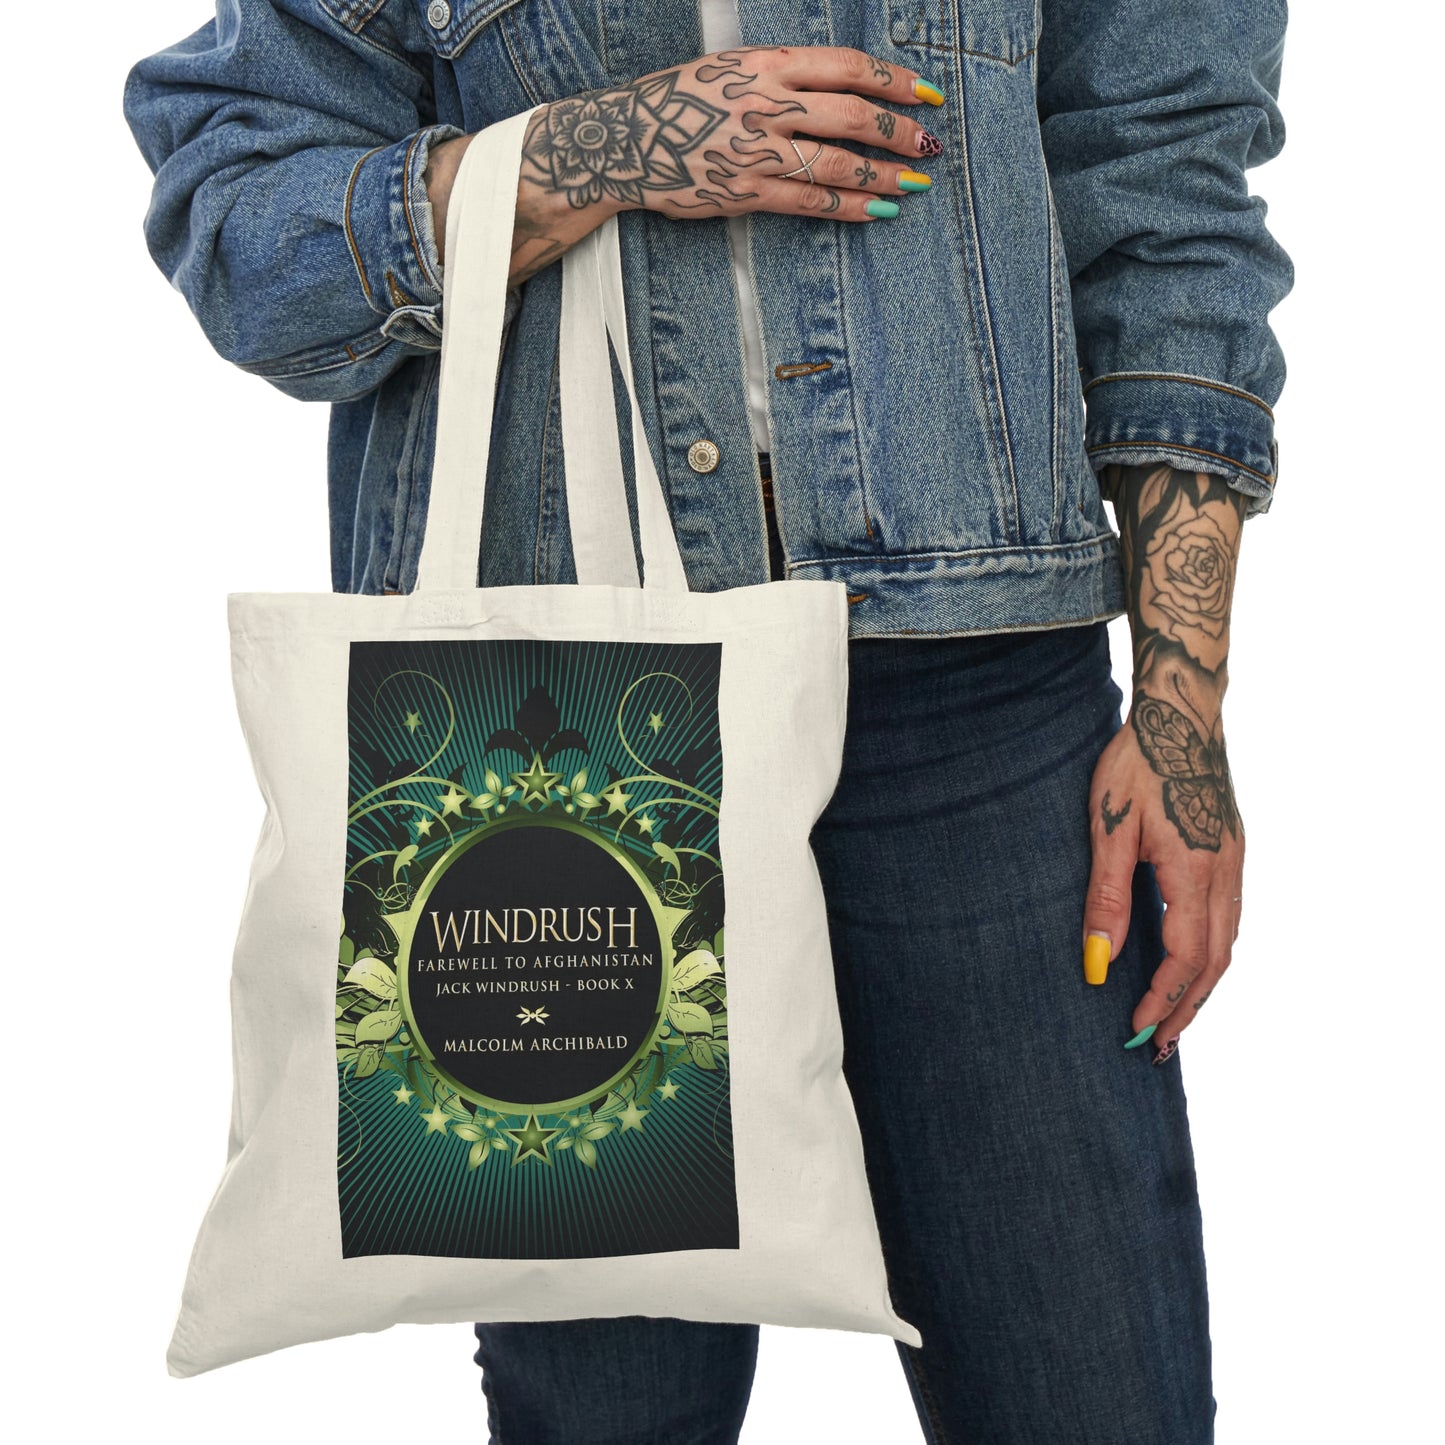 Farewell To Afghanistan - Natural Tote Bag